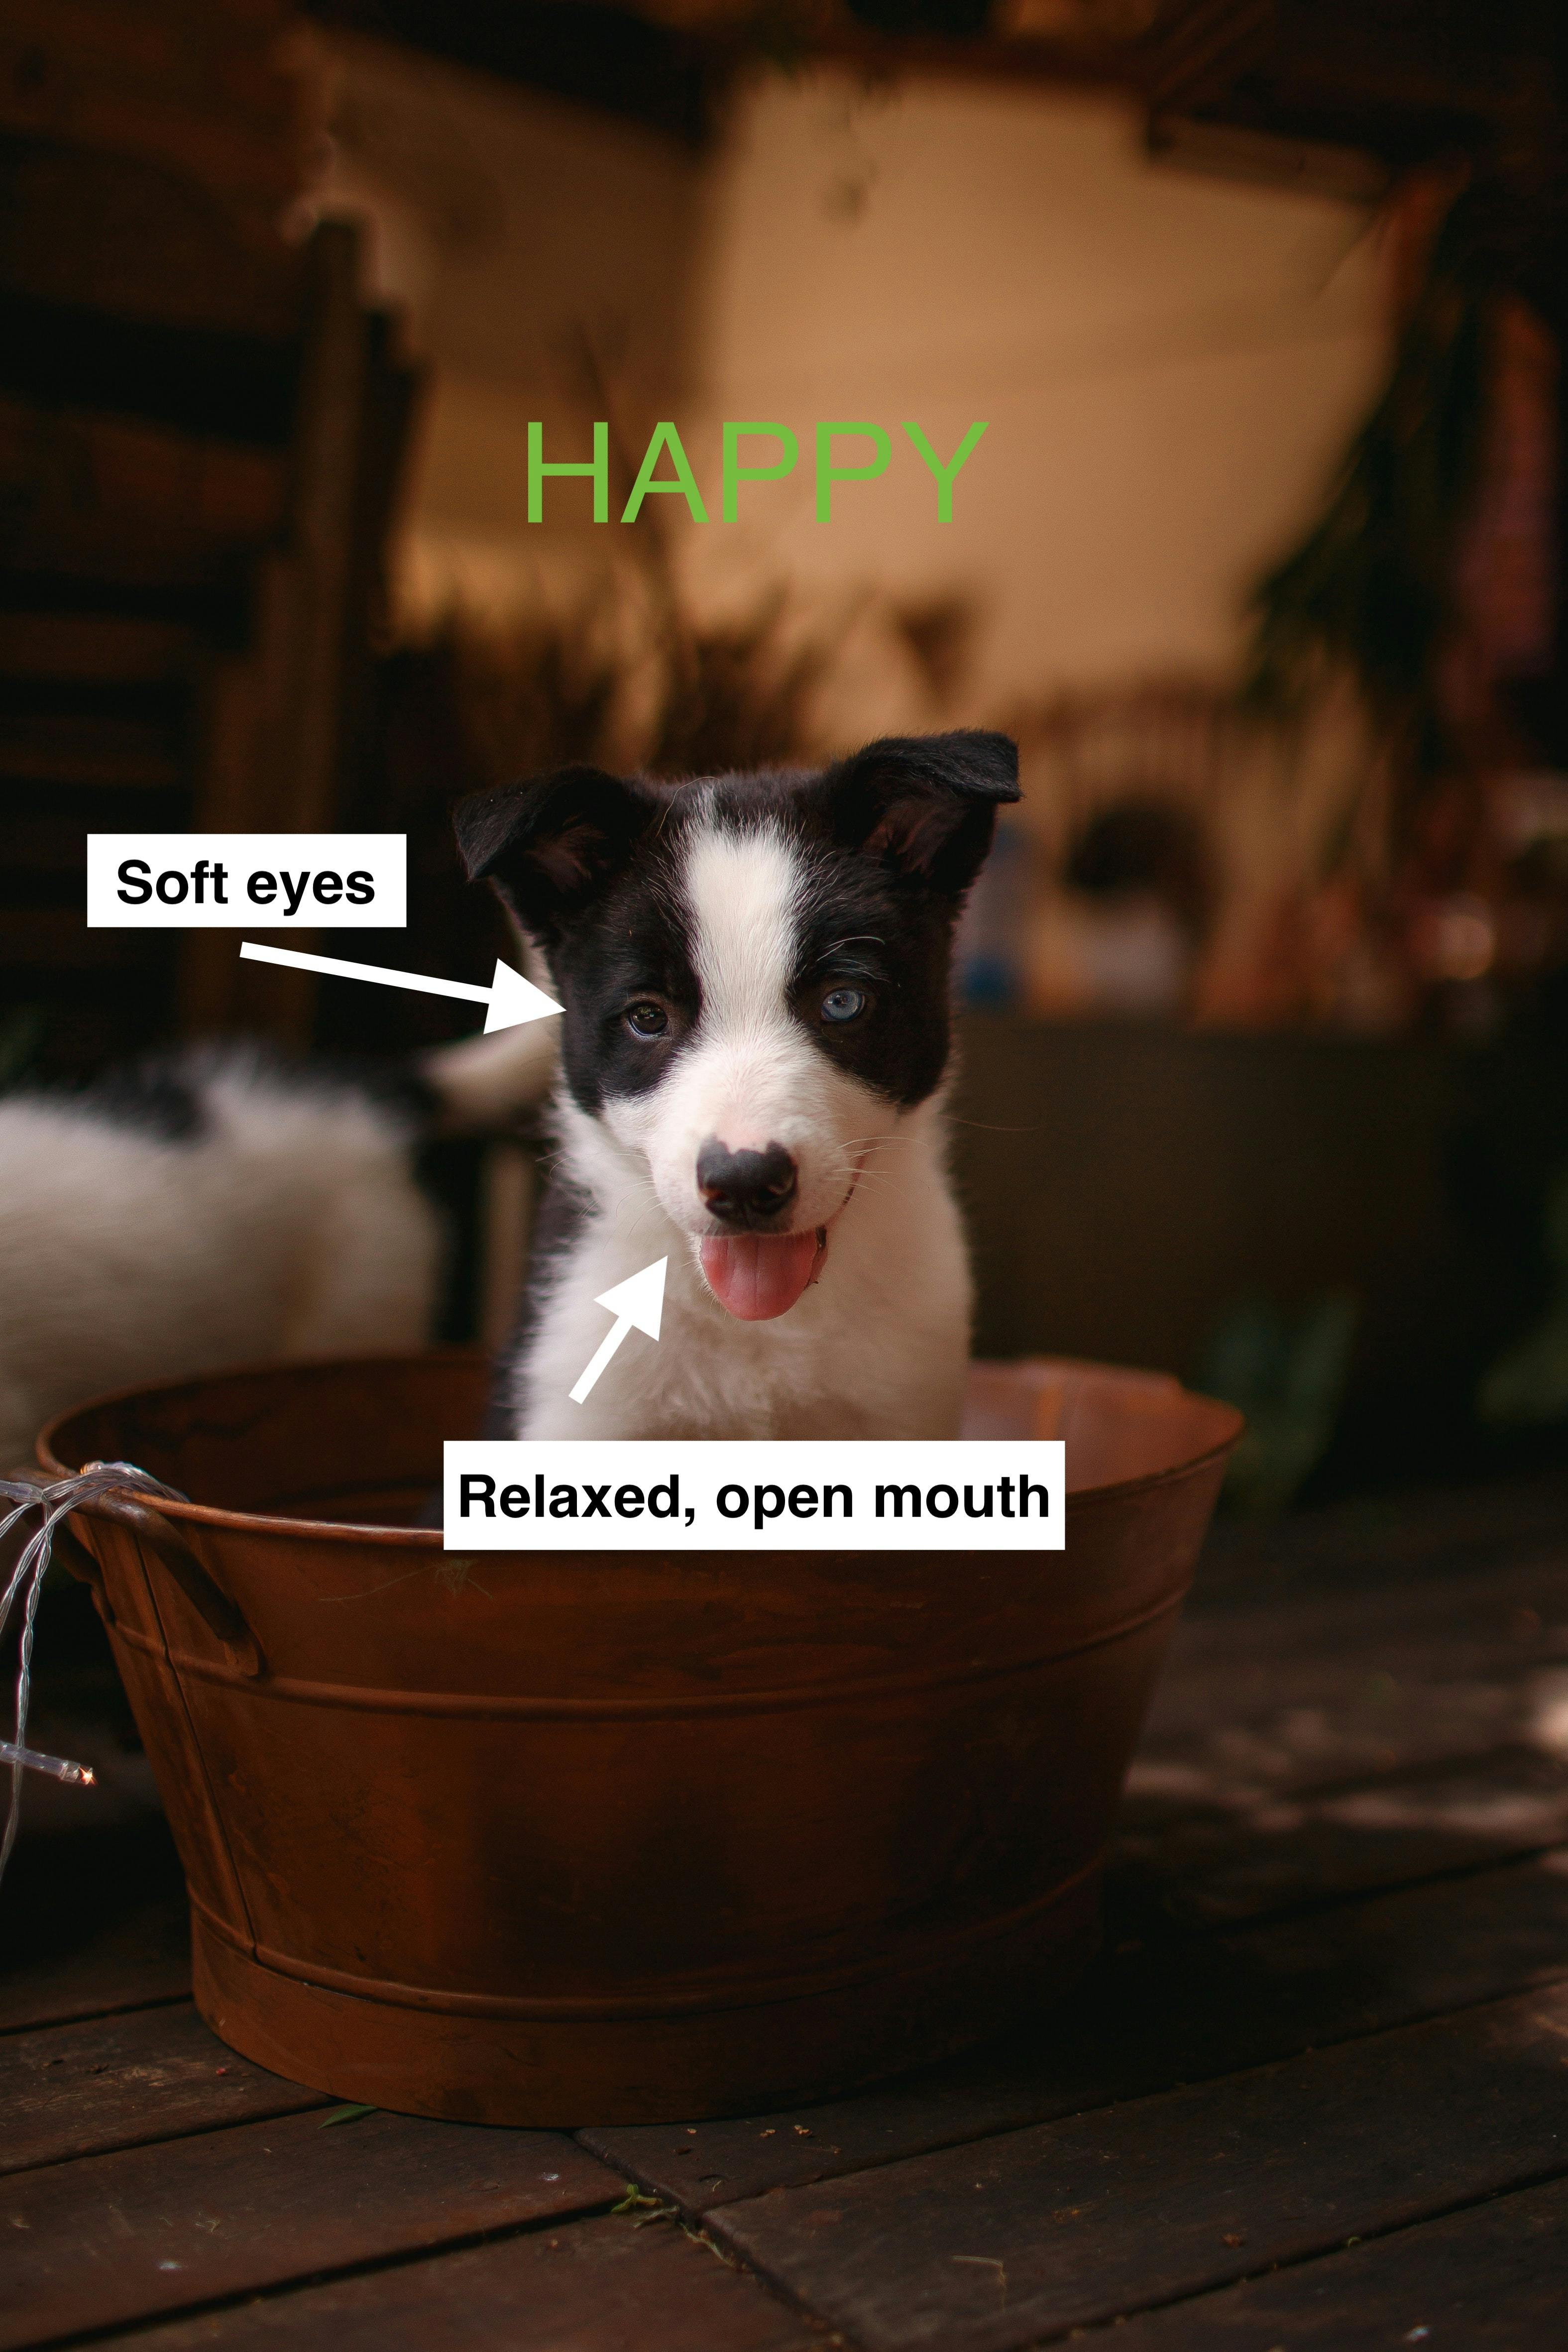 Words overlay an image of a happy puppy, showing happy body language